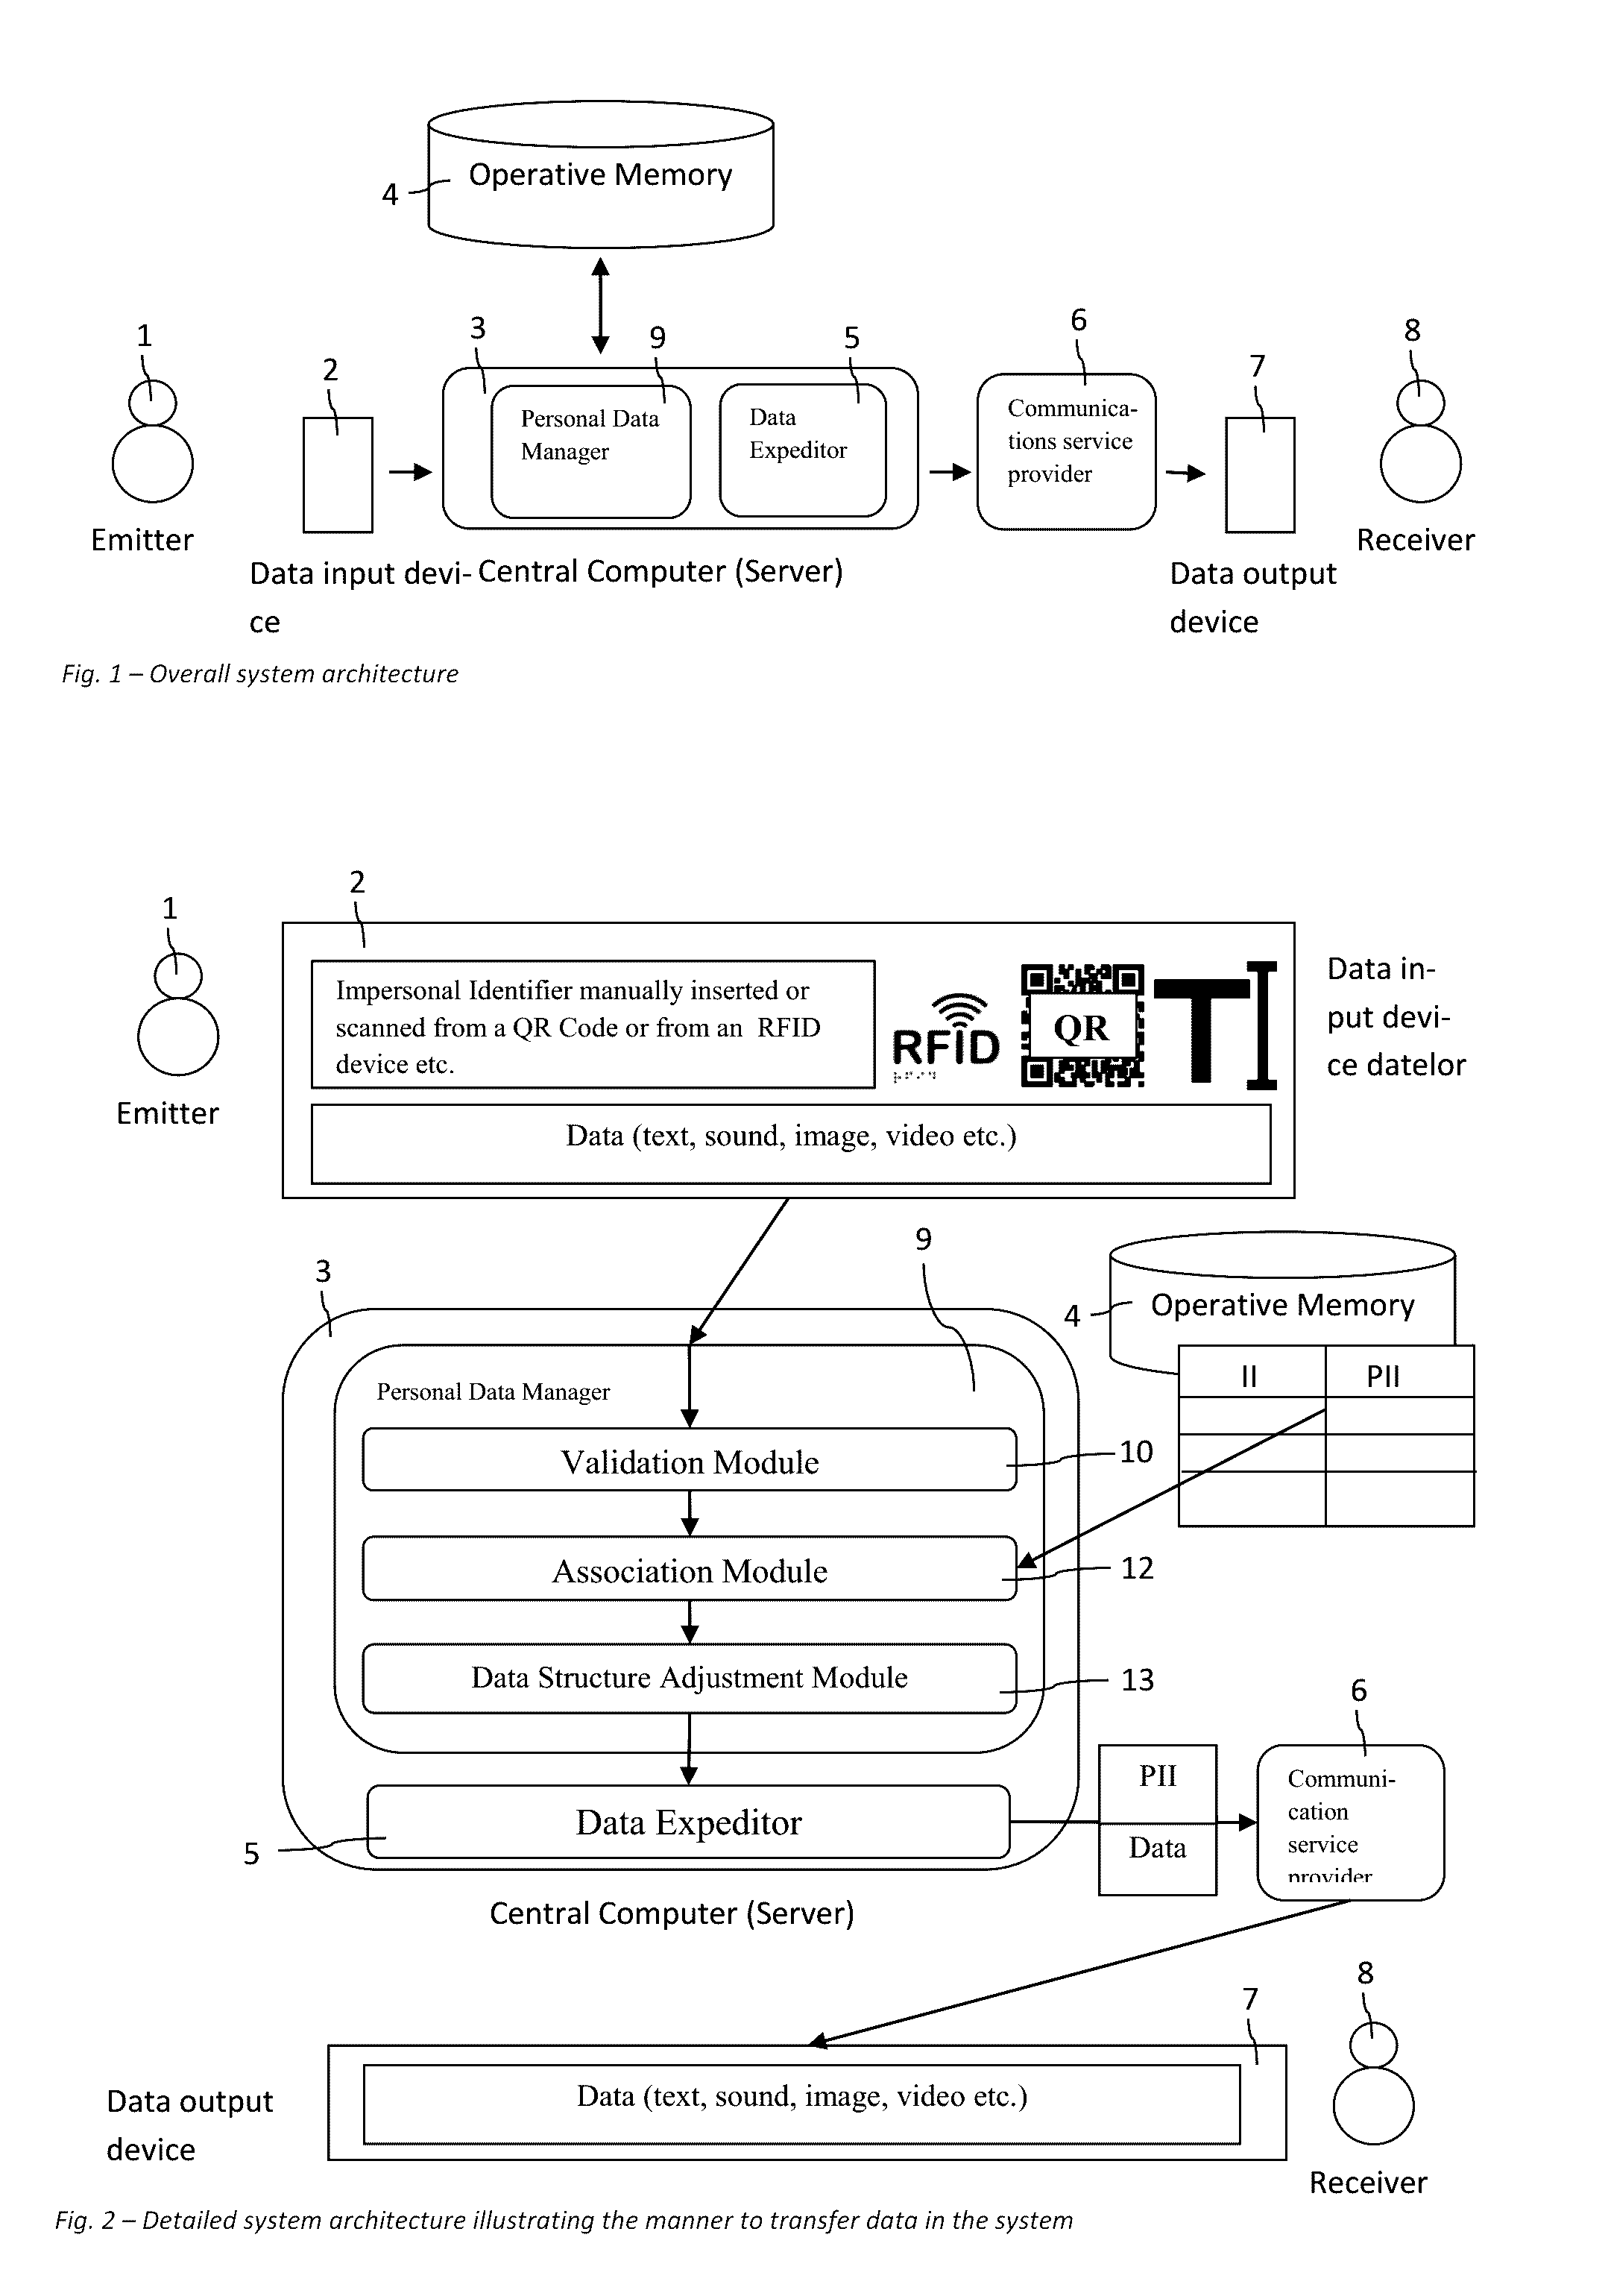 System and method for optimizing the transmission of data associated to an impersonal identifier of the receiver